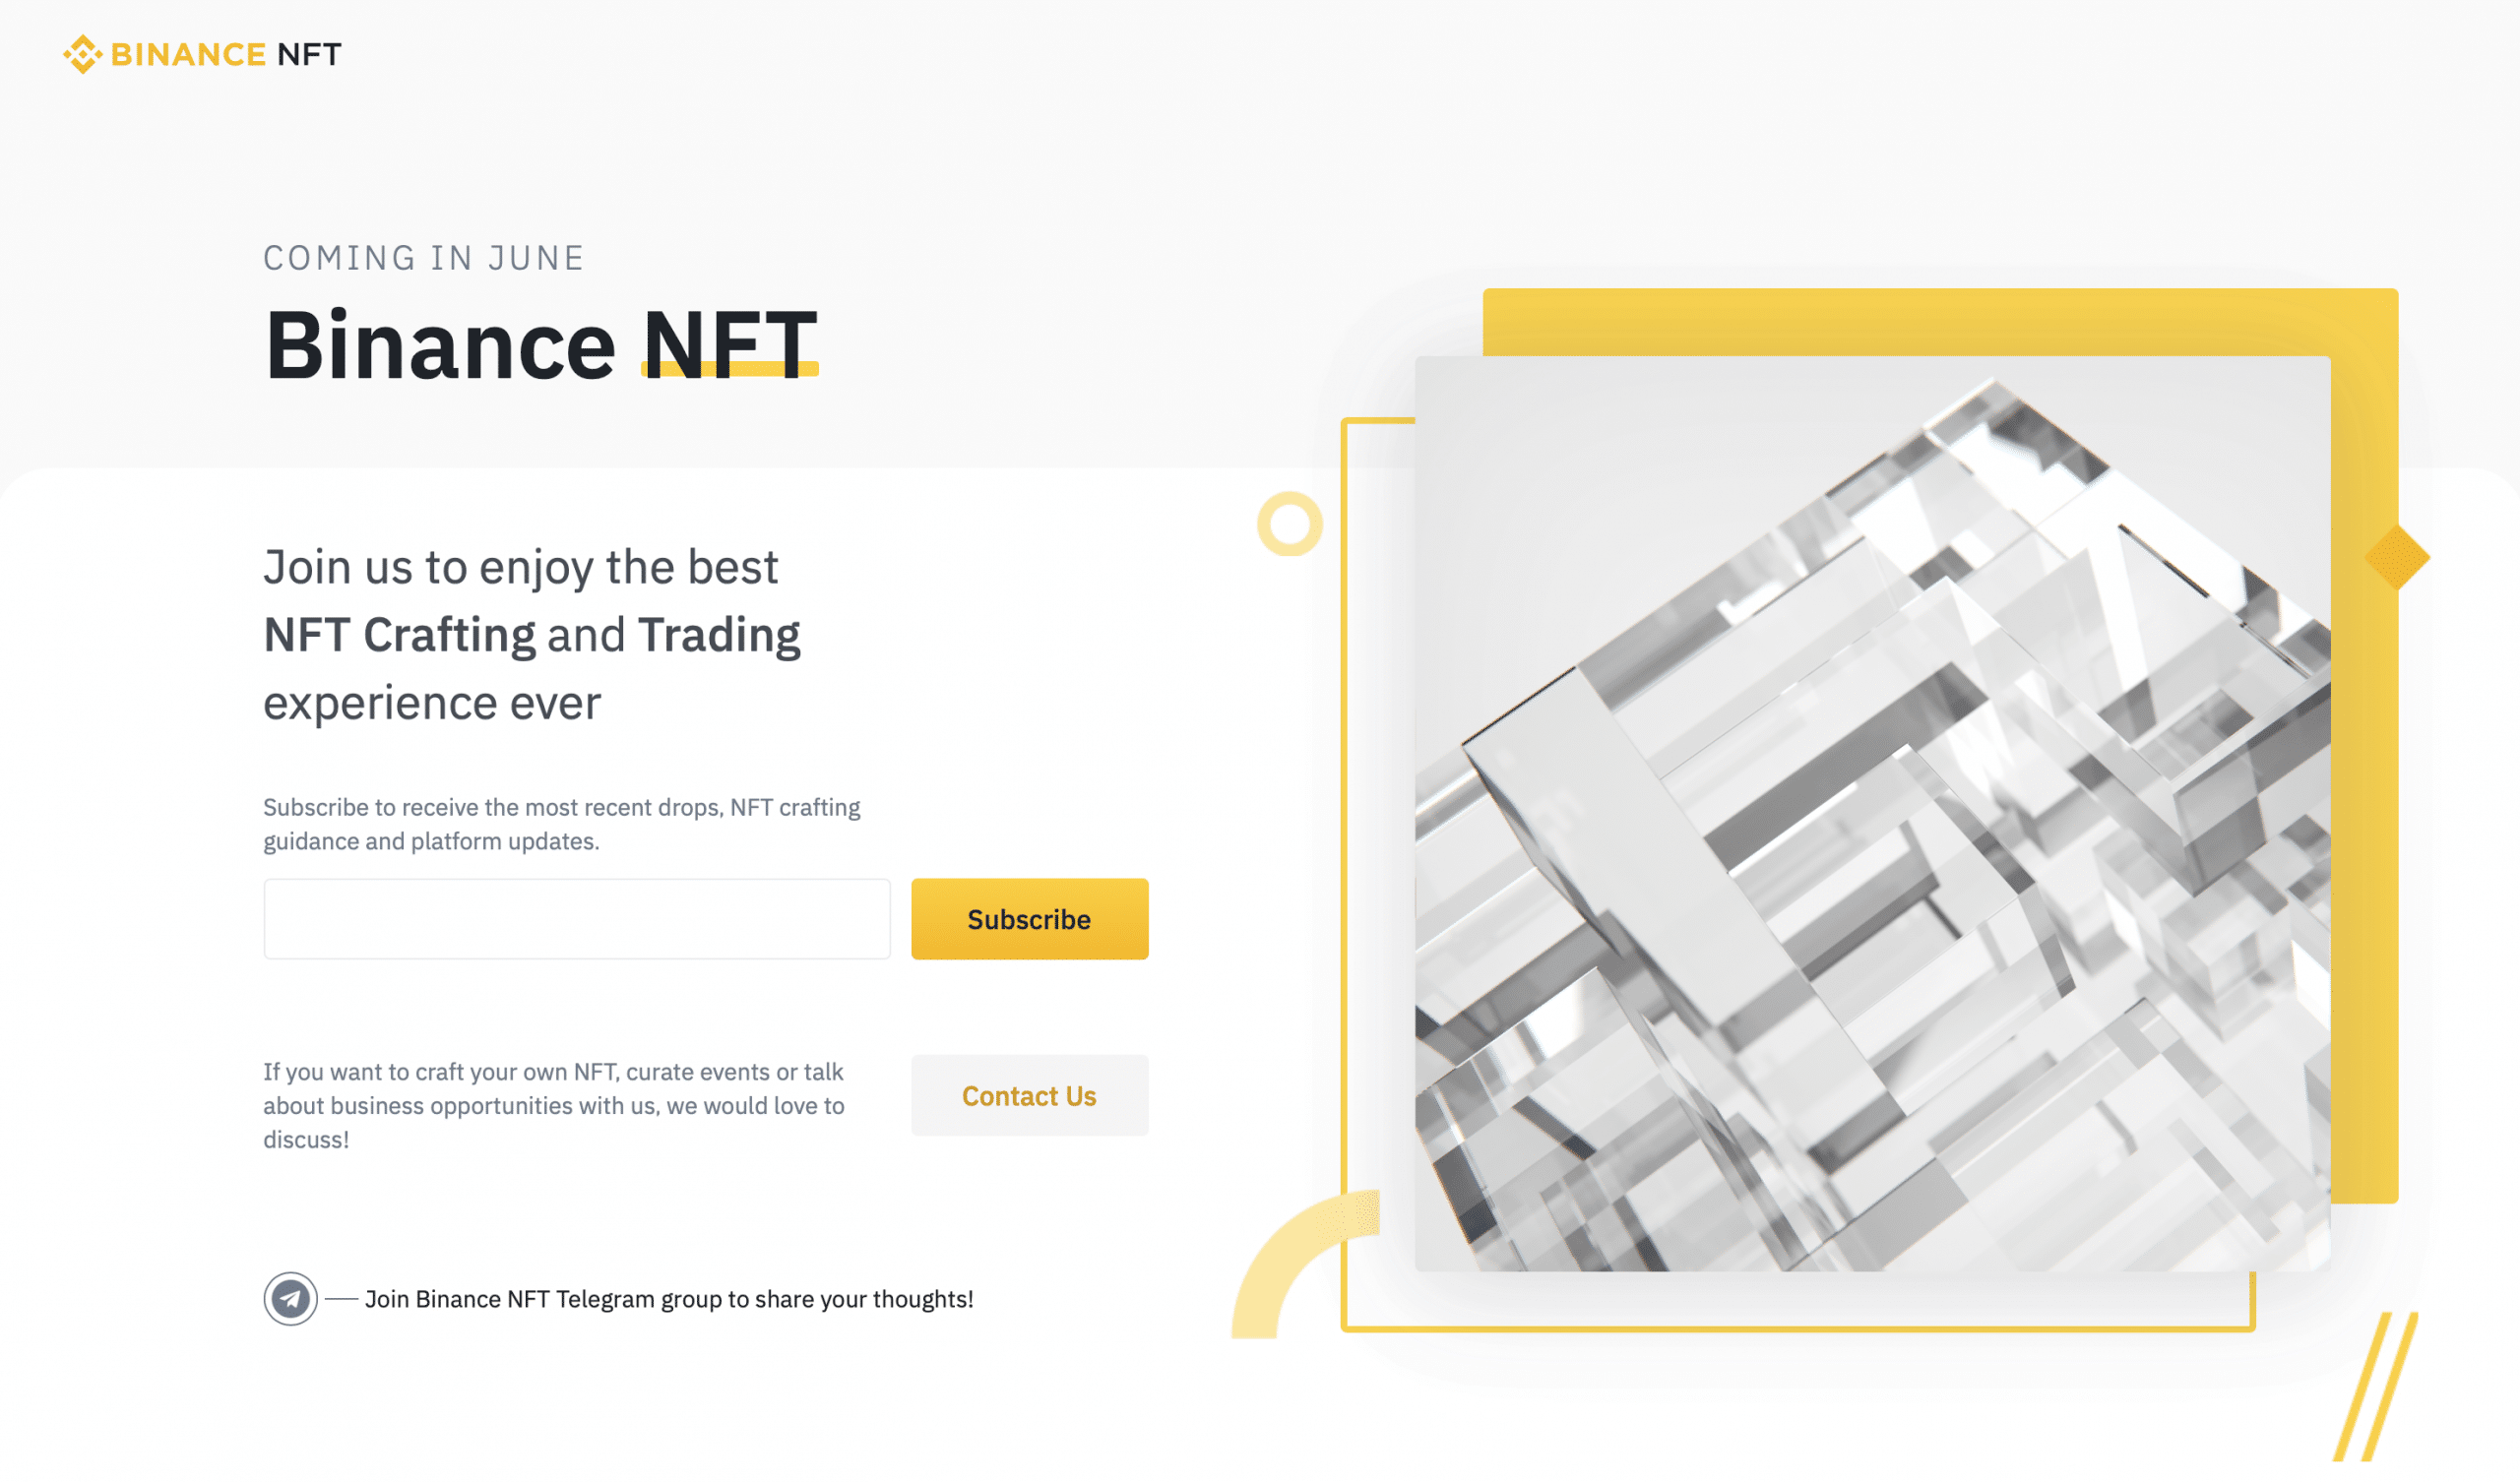 Binance NFT's new program will bring a new marketplace for creators and buyers alike.